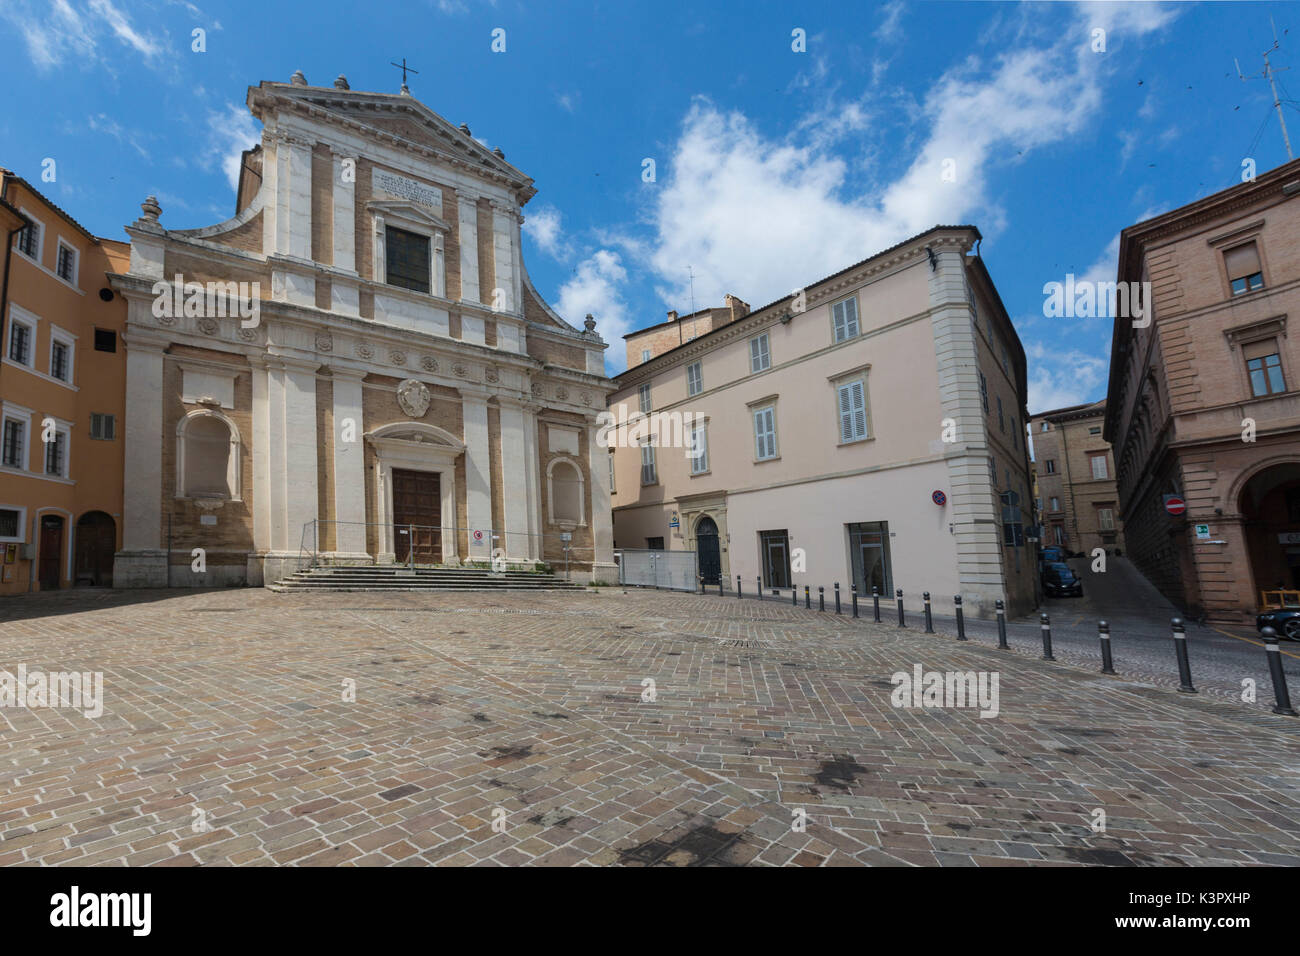 View of Saint Giovanni church and the historical buildings of the medieval old town Macerata Marche Italy Europe Stock Photo